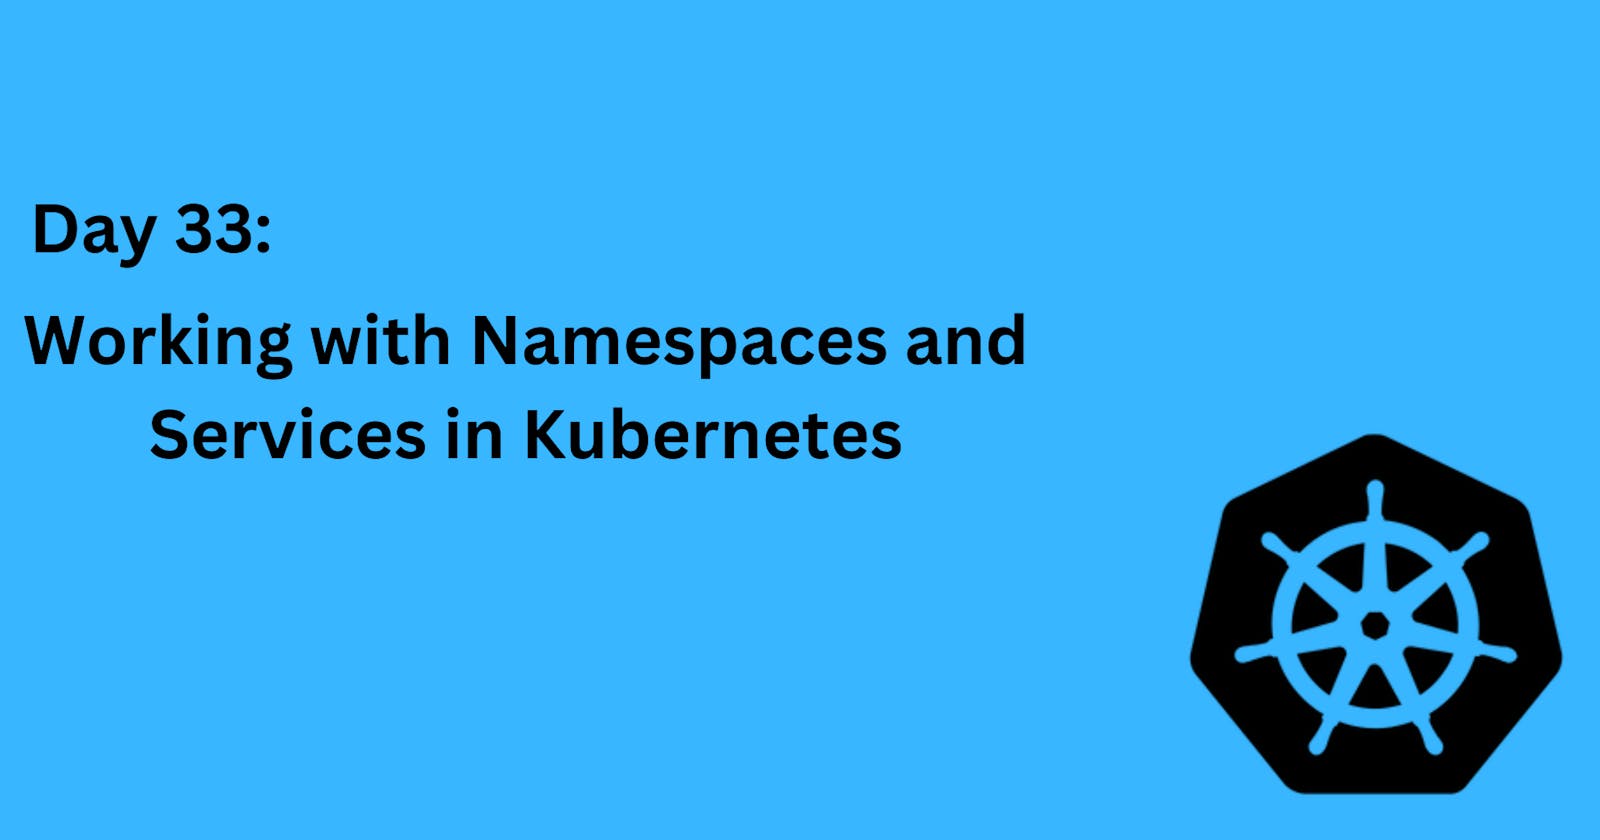 Day 33: Working with Namespaces and Services in Kubernetes